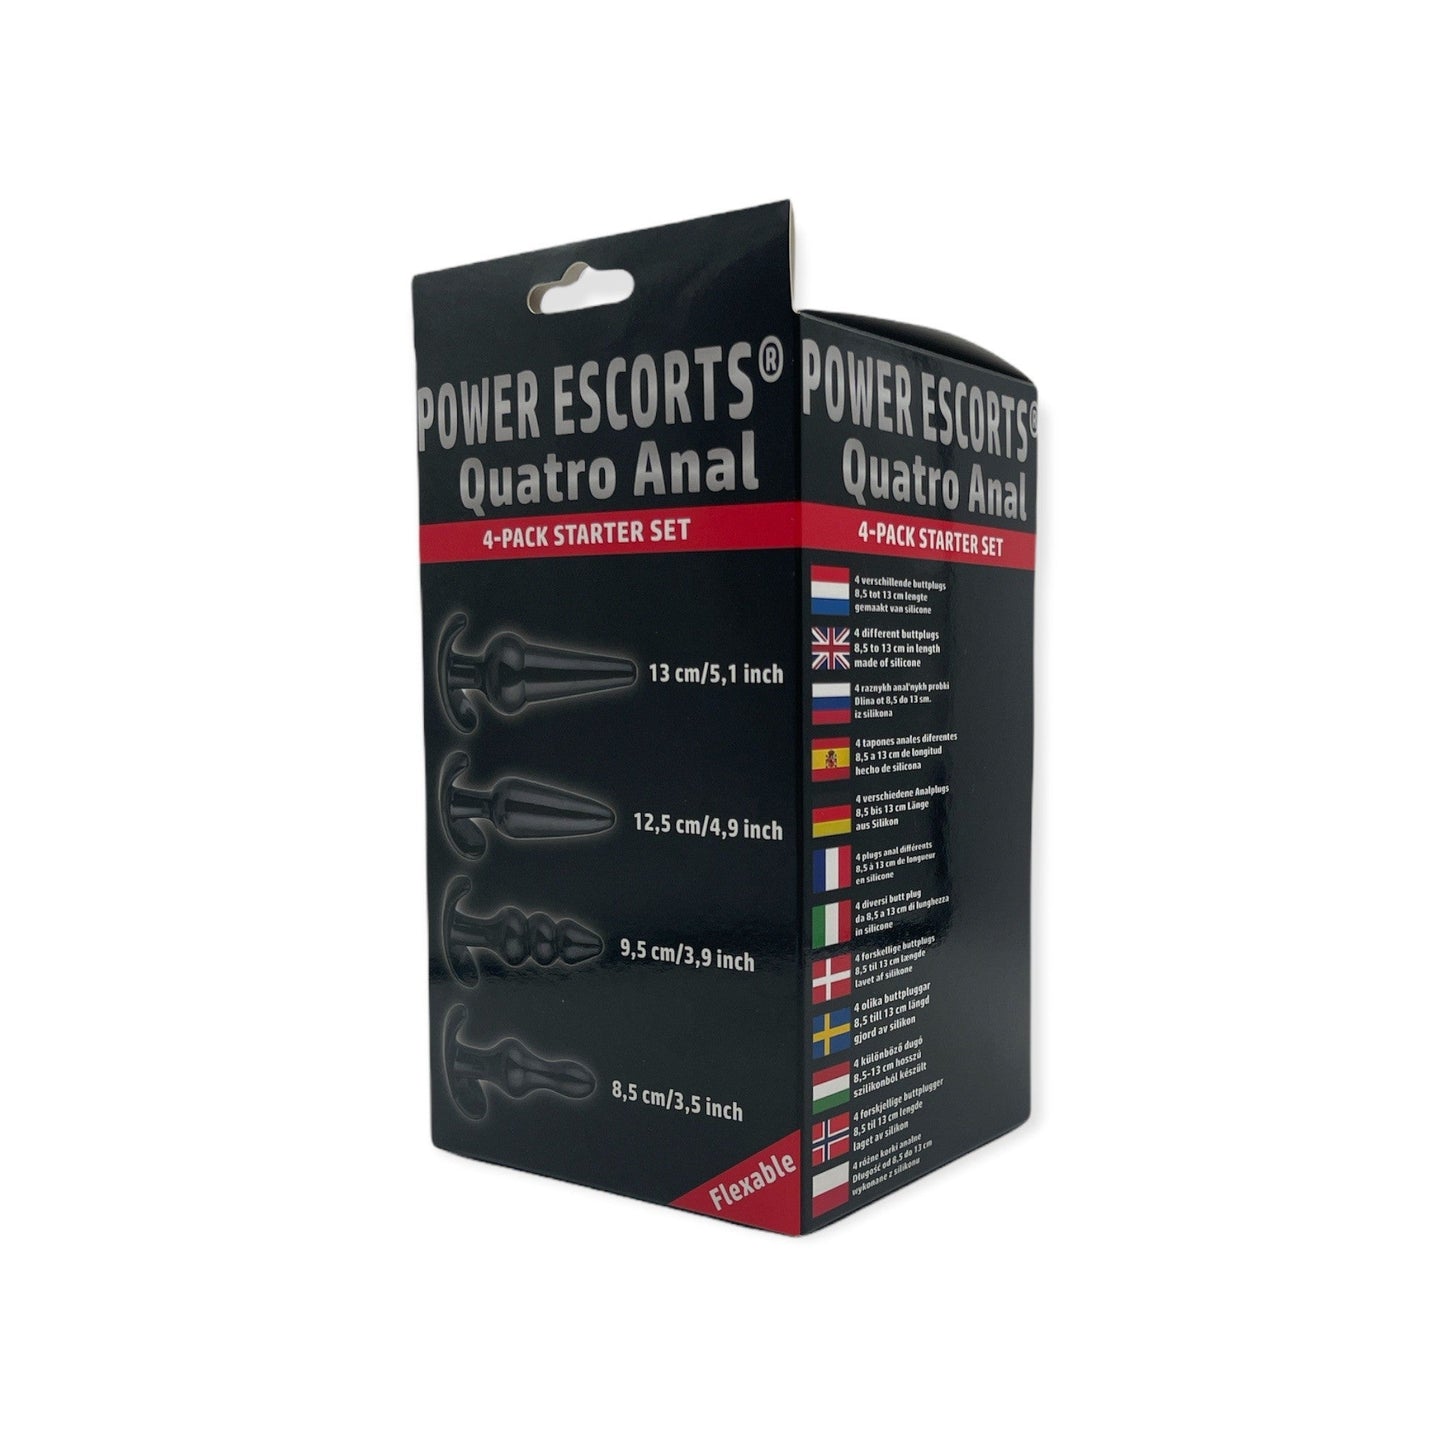 Power Escorts - BR274 - Quatro Anal Plugs - Anal Starter Set - 4-Pack Anal Plugs - Black - Buttplug 4 different sizes - attractive Colour box